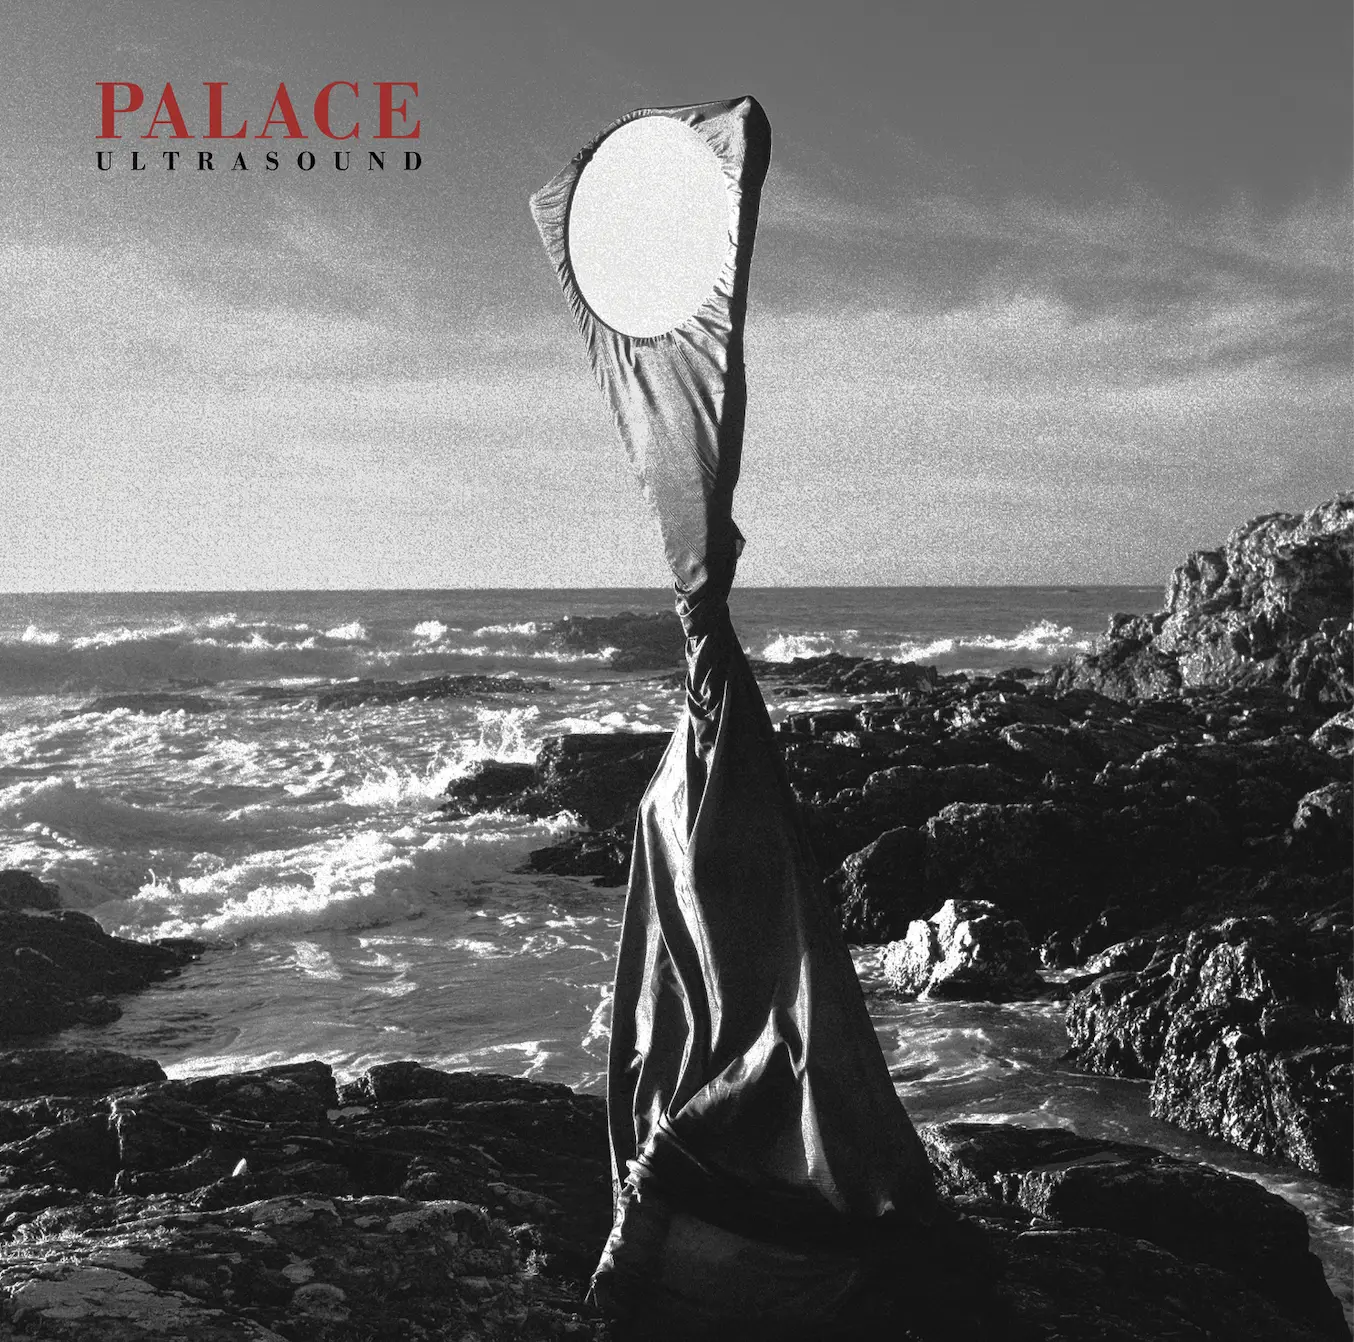 <strong>Palace - Ultrasound</strong> (Vinyl LP - red)